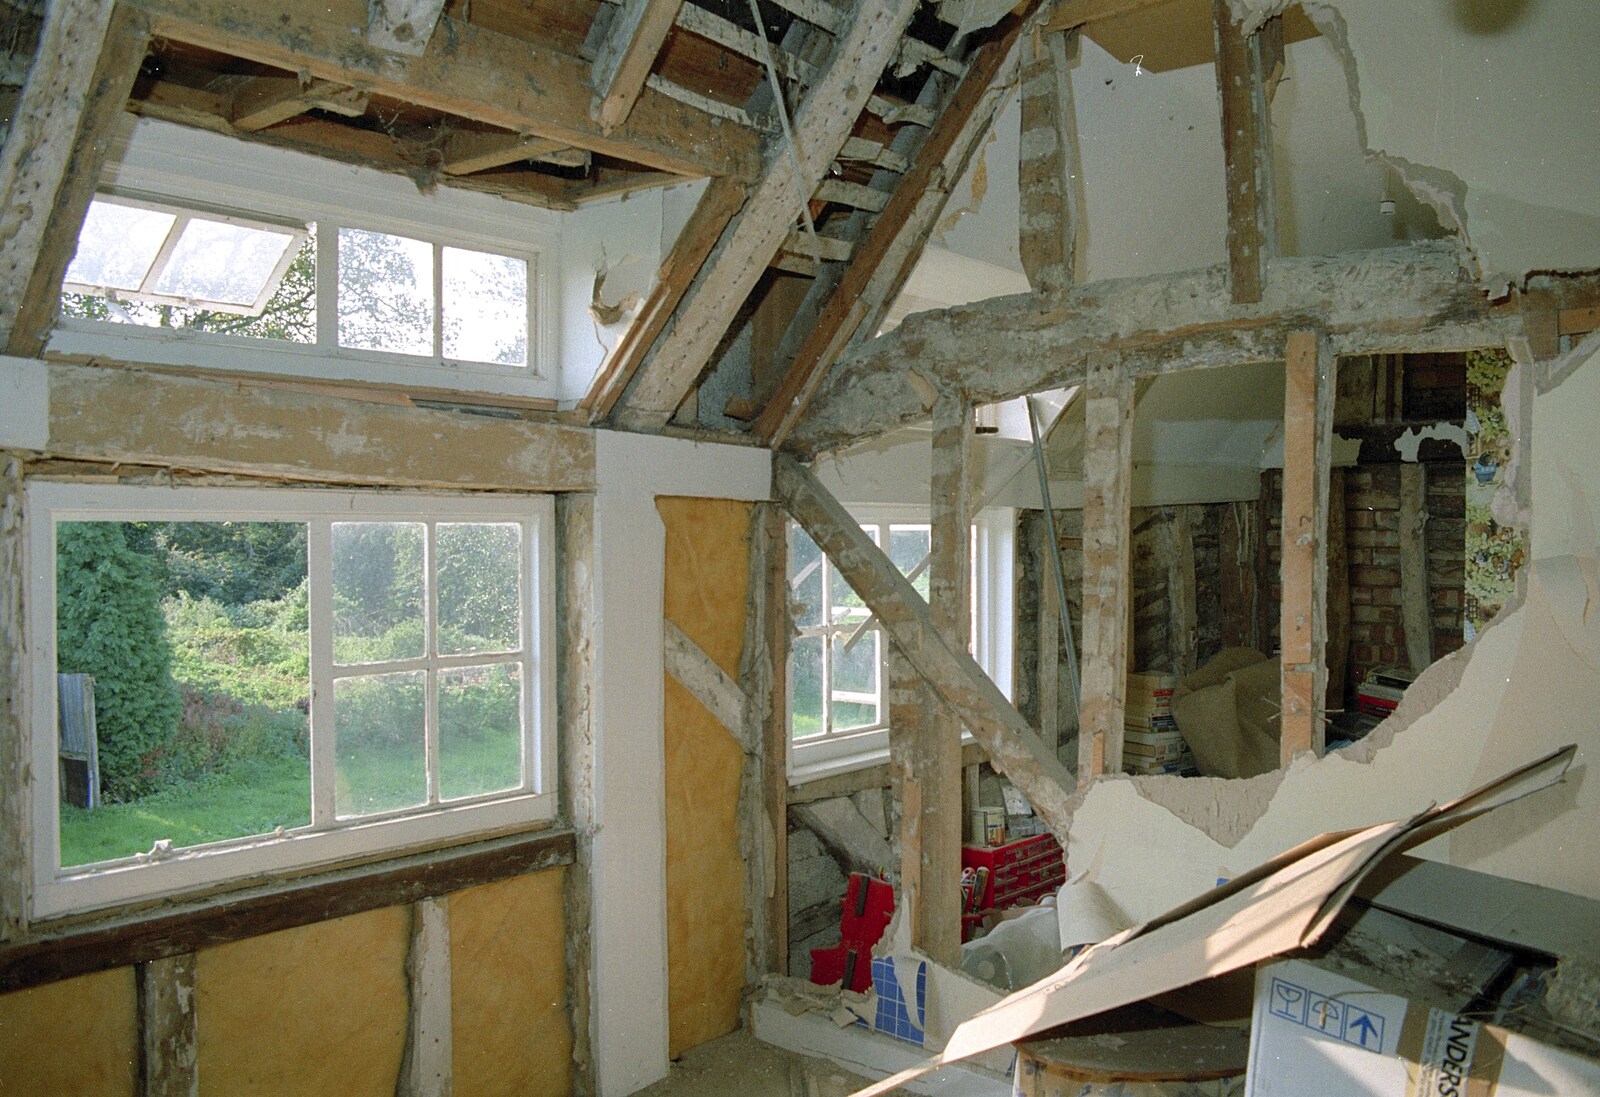 A view to the next-door bedroom from Bedroom Demolition, Brome, Suffolk - 15th May 1995